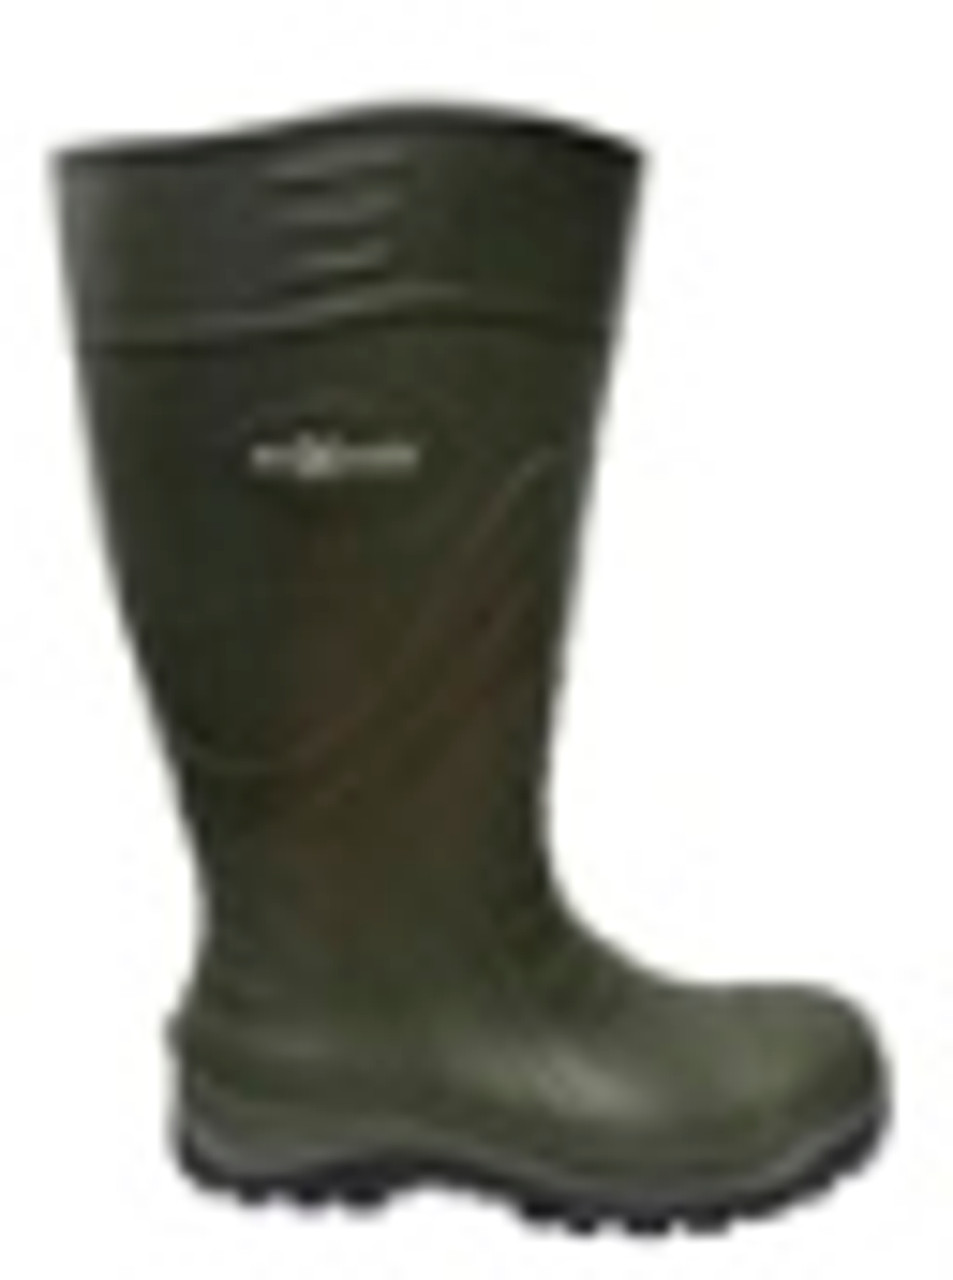 Patrol Green Pu Boot W/ Safety Toe, Size 7